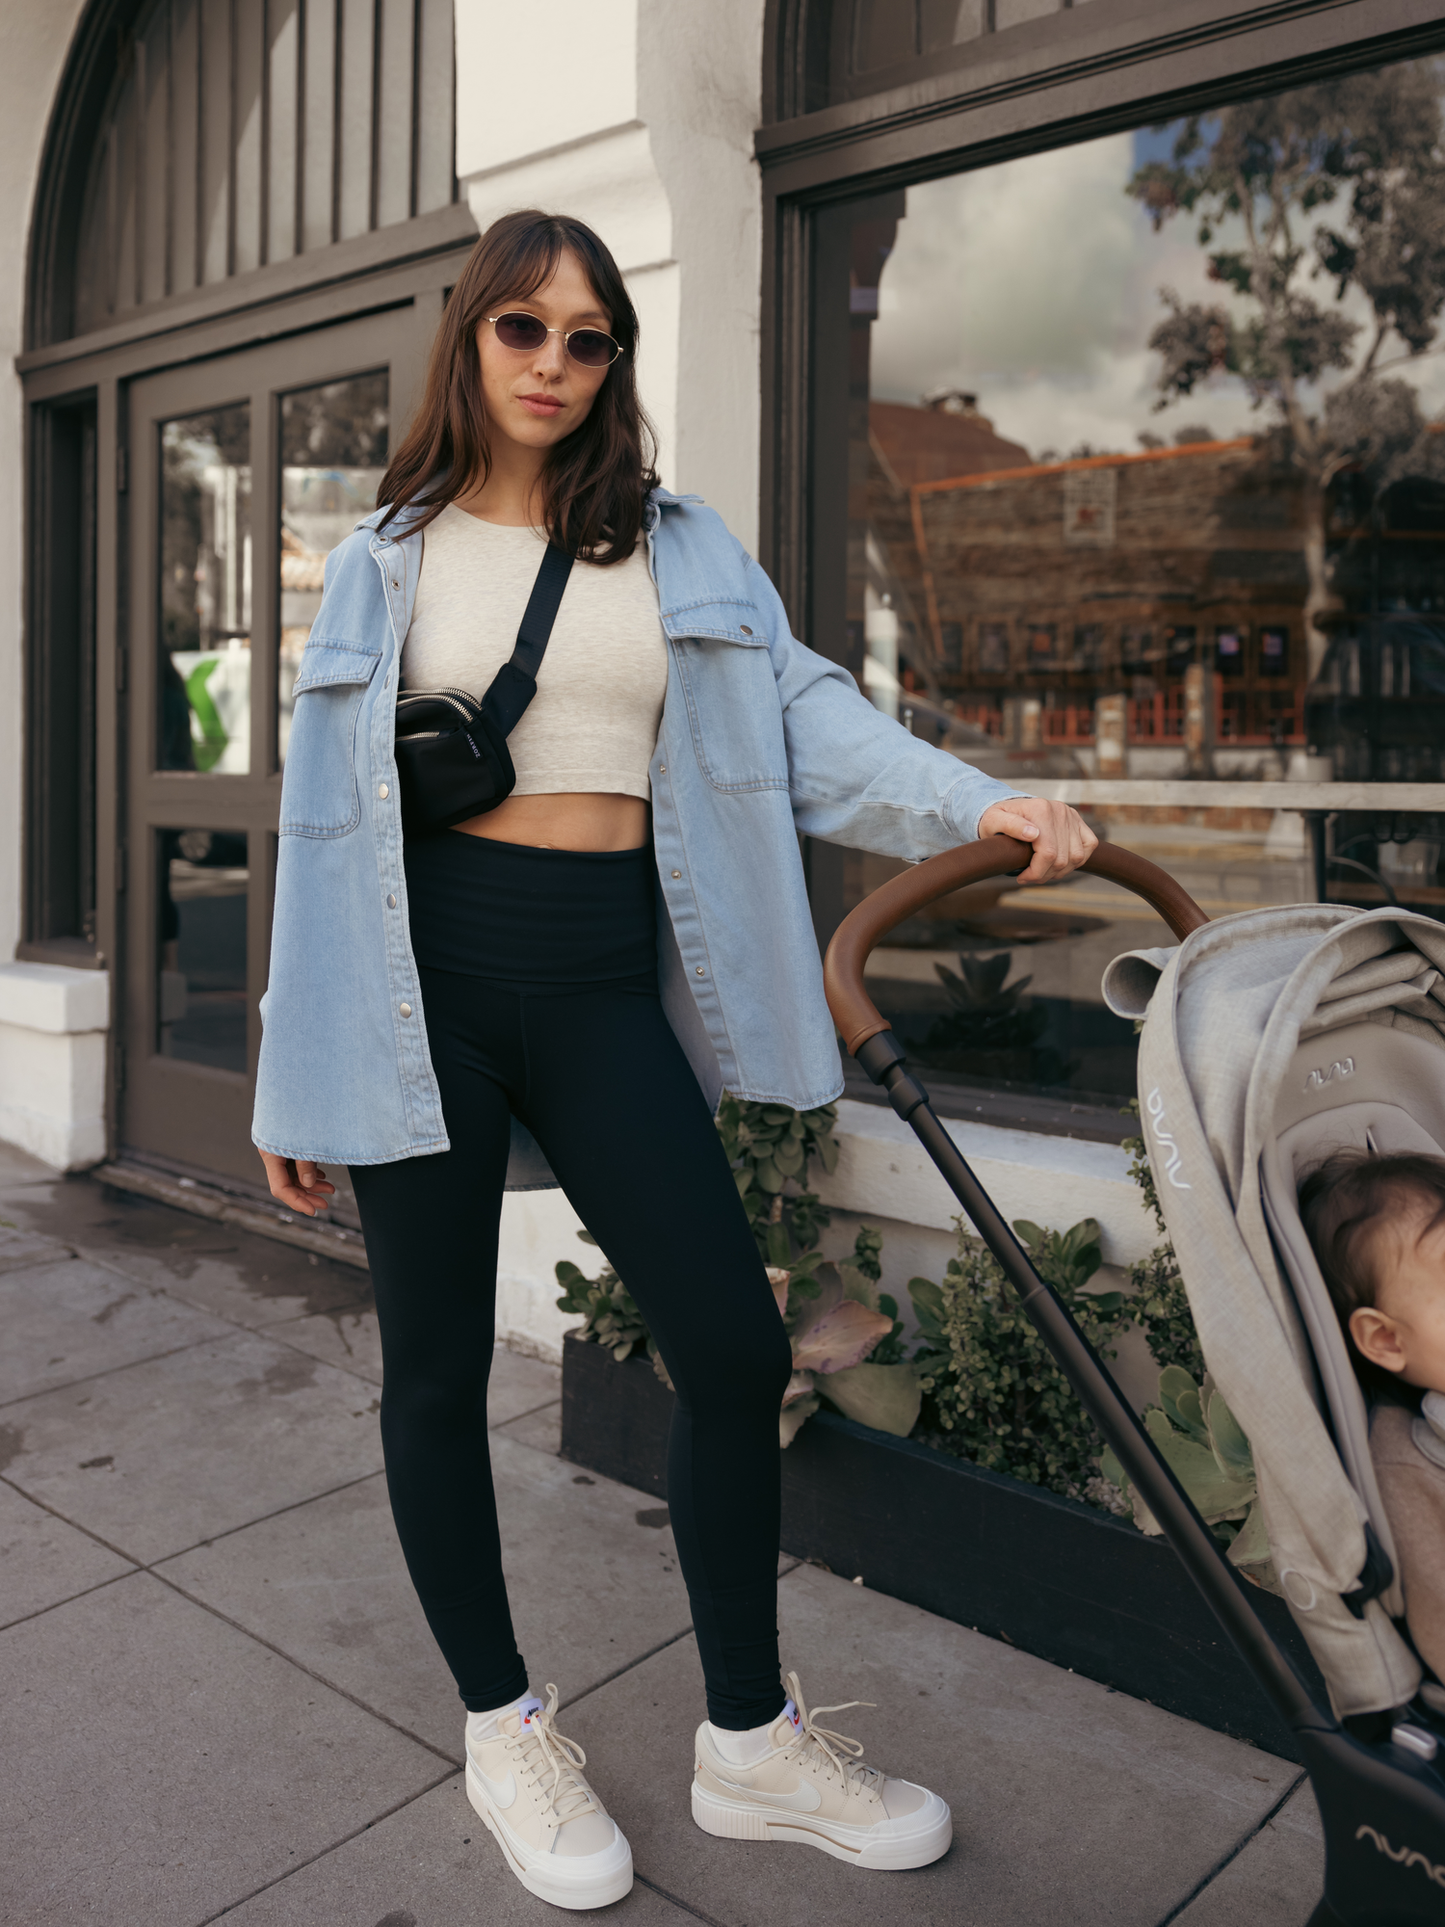 Model outside with stroller and wearing the Sublime Bamboo Maternity & Nursing Longline Bra in Oatmeal Heather, paired with the Louisa Maternity & Postpartum Legging and a denim shacket.